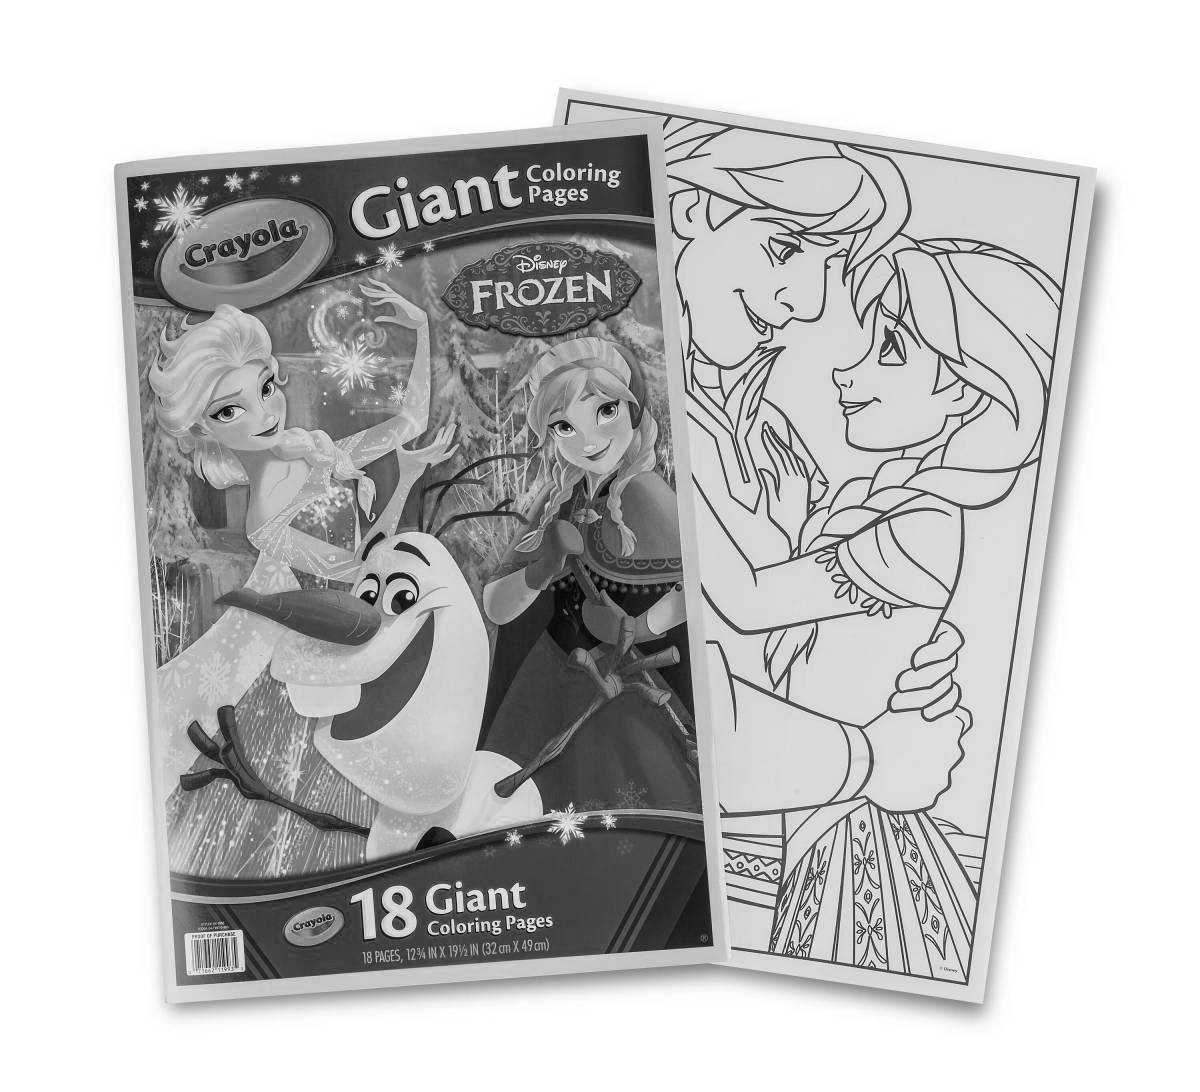 Awesome Mega Frozen Coloring Page